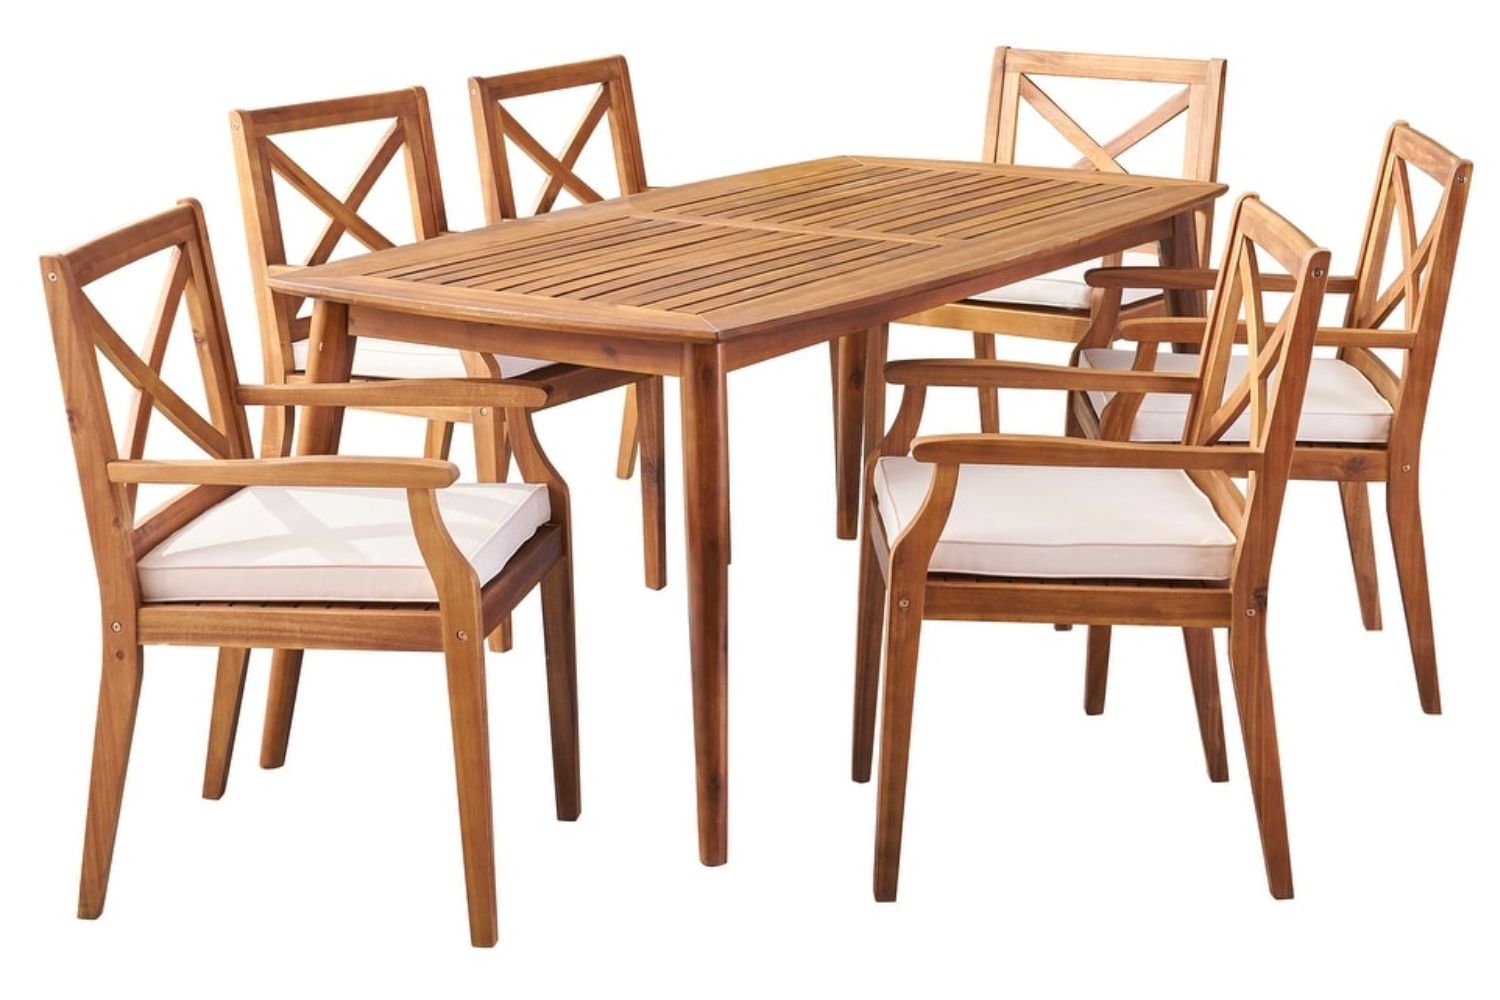 The Best Furniture Deals Option: Christopher Knight Home Llano Outdoor 7-Piece Acacia Dining Set